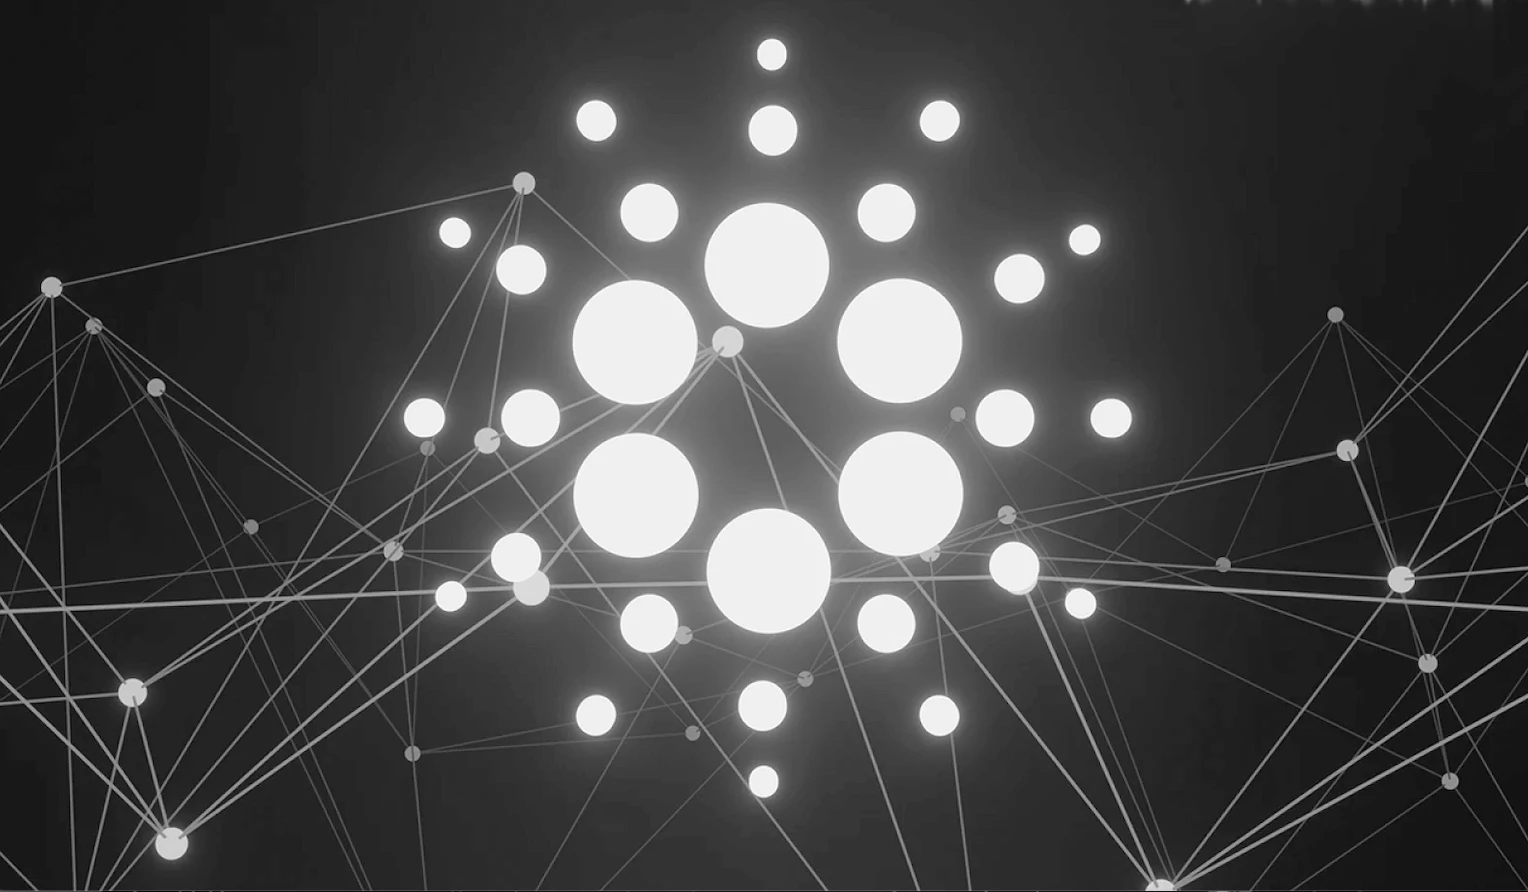 A black and white image showing an abstract representation of a network with interconnected nodes and lines, with several larger circles grouped in the center, forming the Cardano logo. The design suggests connectivity and complexity.